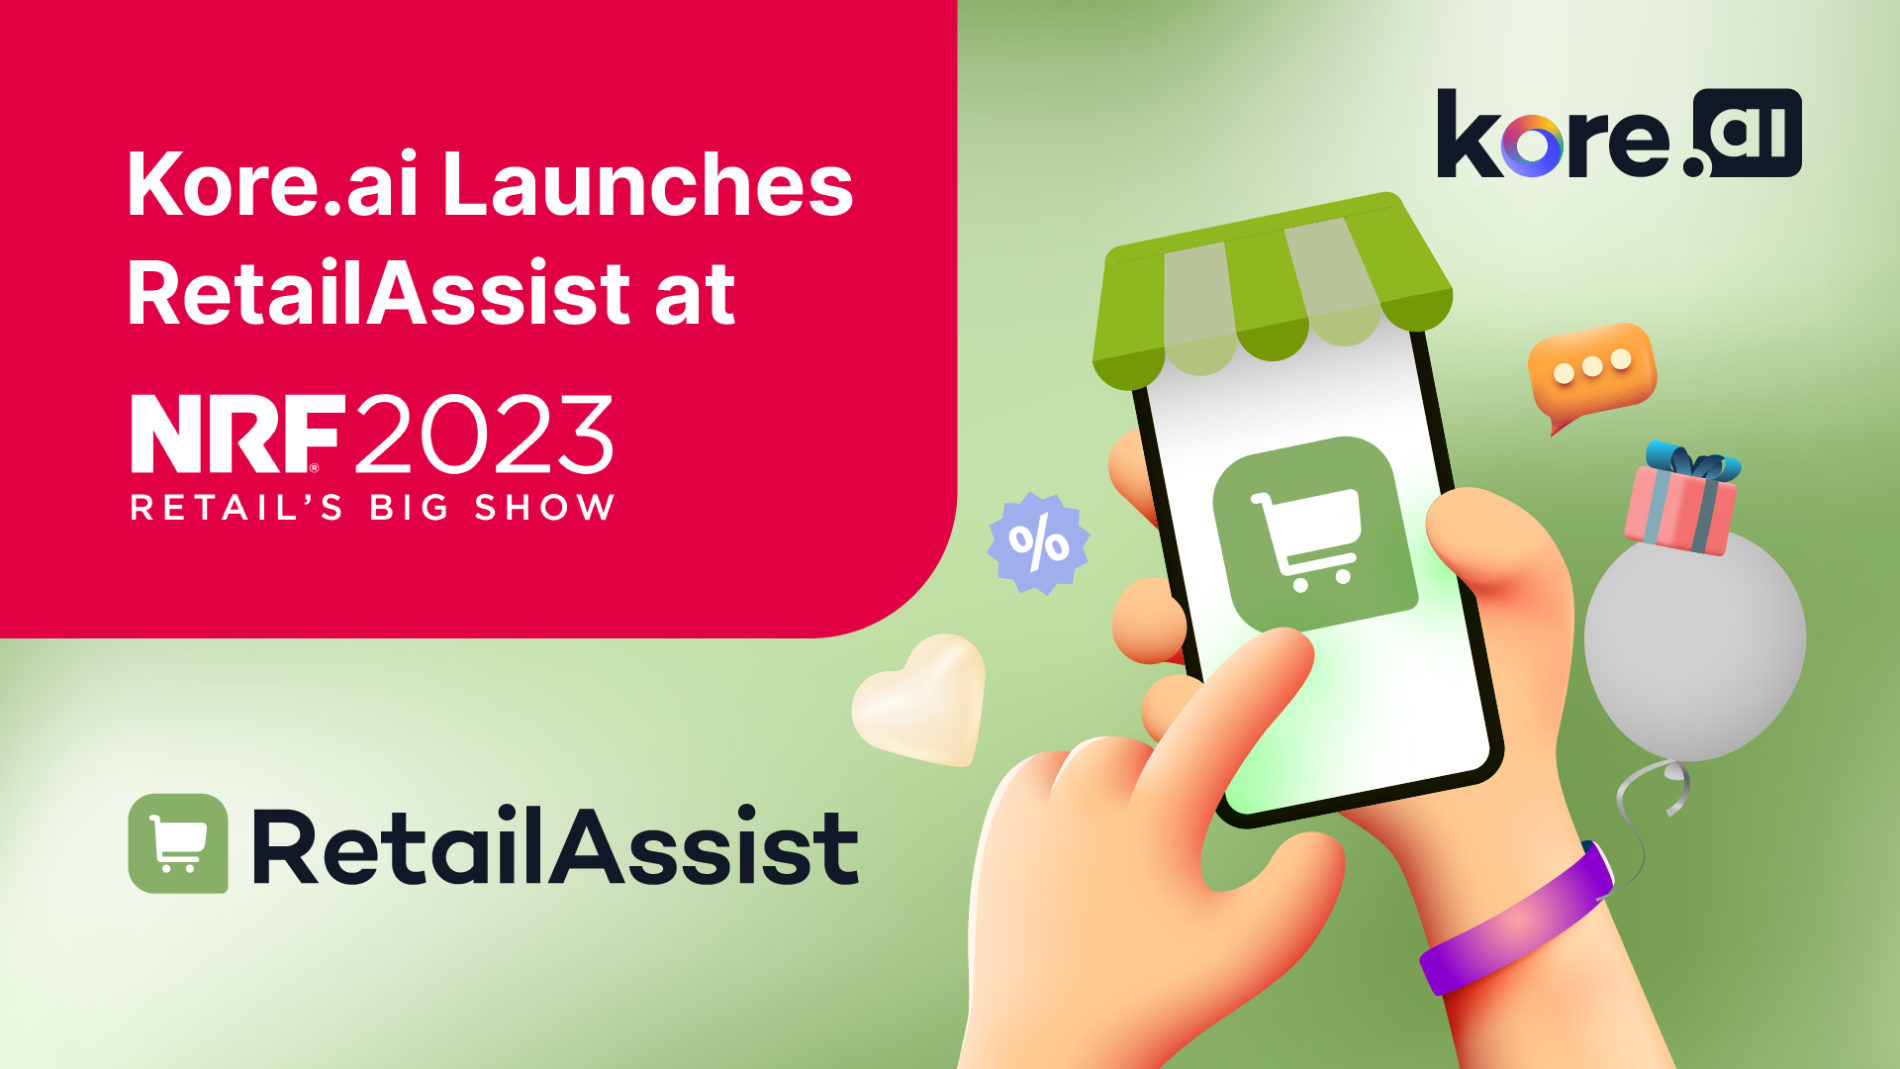 Kore.ai Launches RetailAssist At NRF 2023